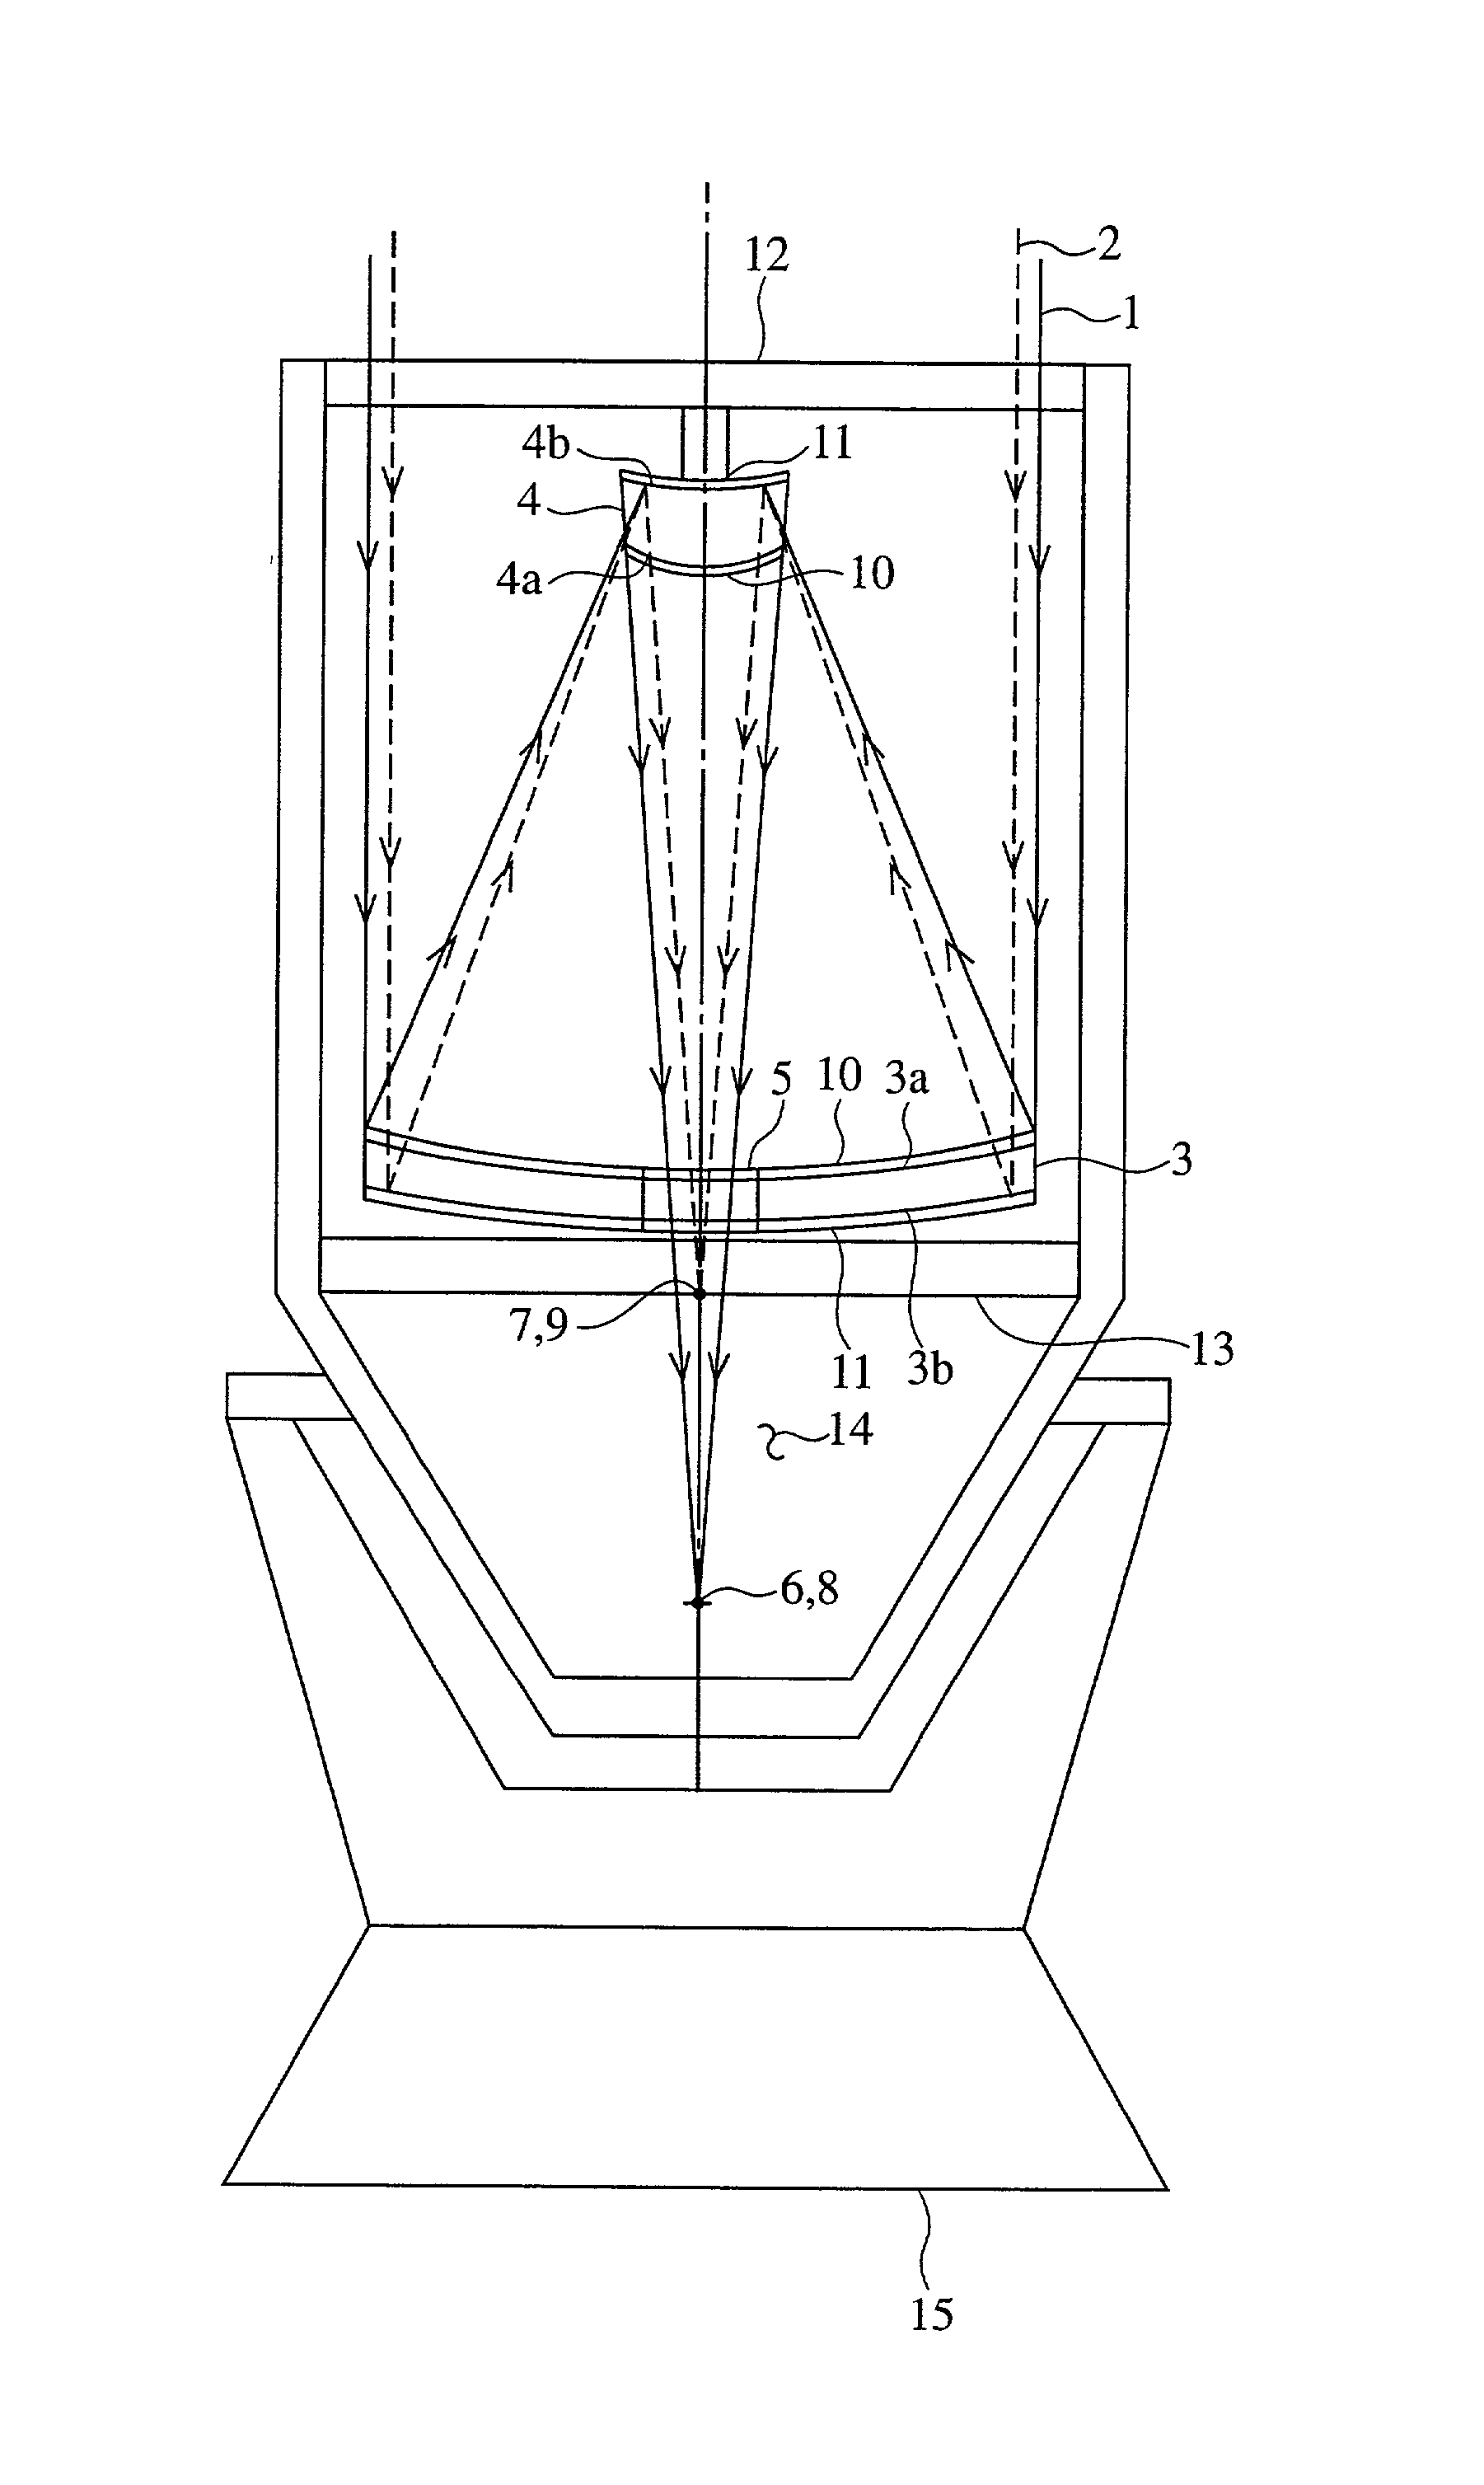 Multi-frequency telescope apparatus for celestial observations using reflecting telescope